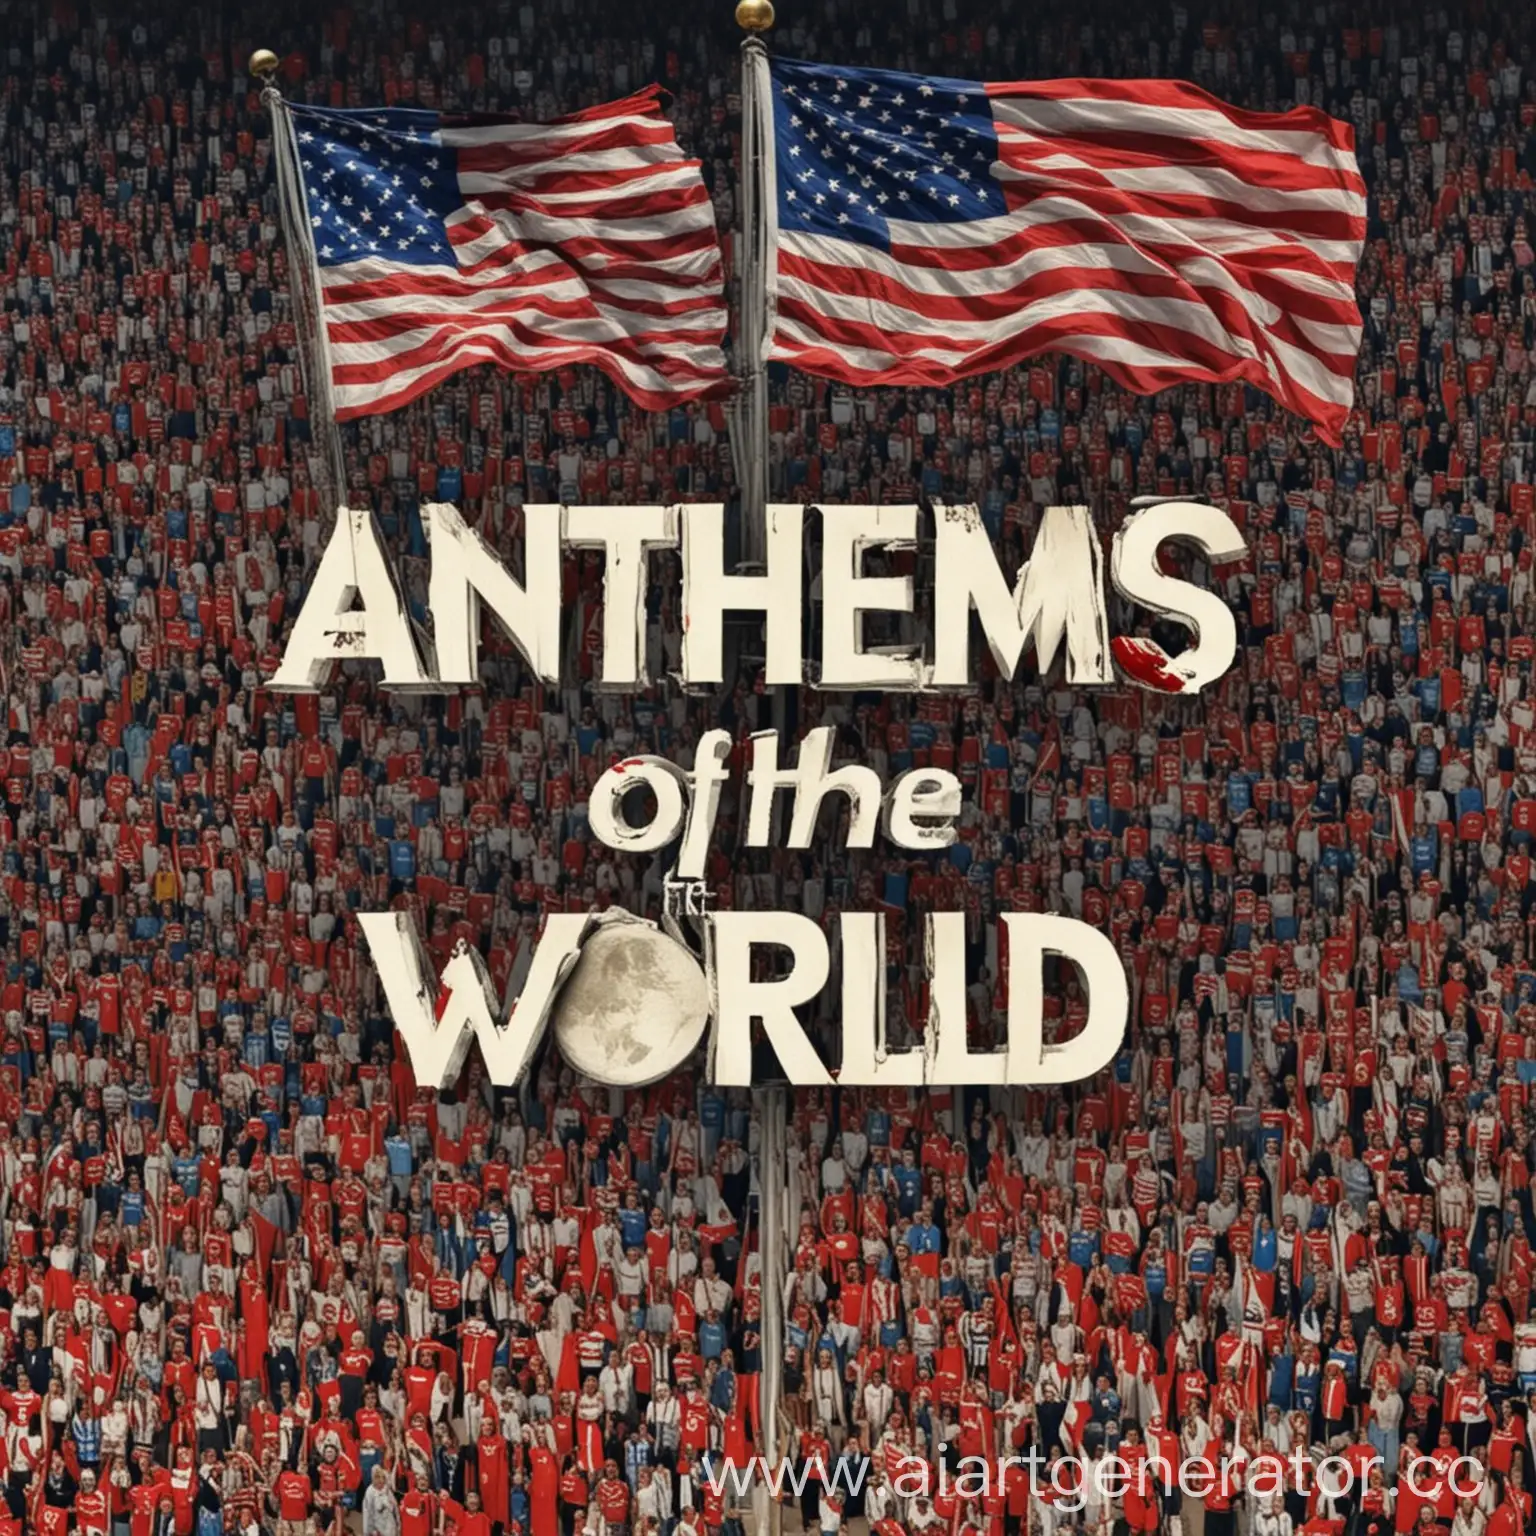 Diverse-Flags-Flying-Anthems-of-the-World-Unite-in-Harmony